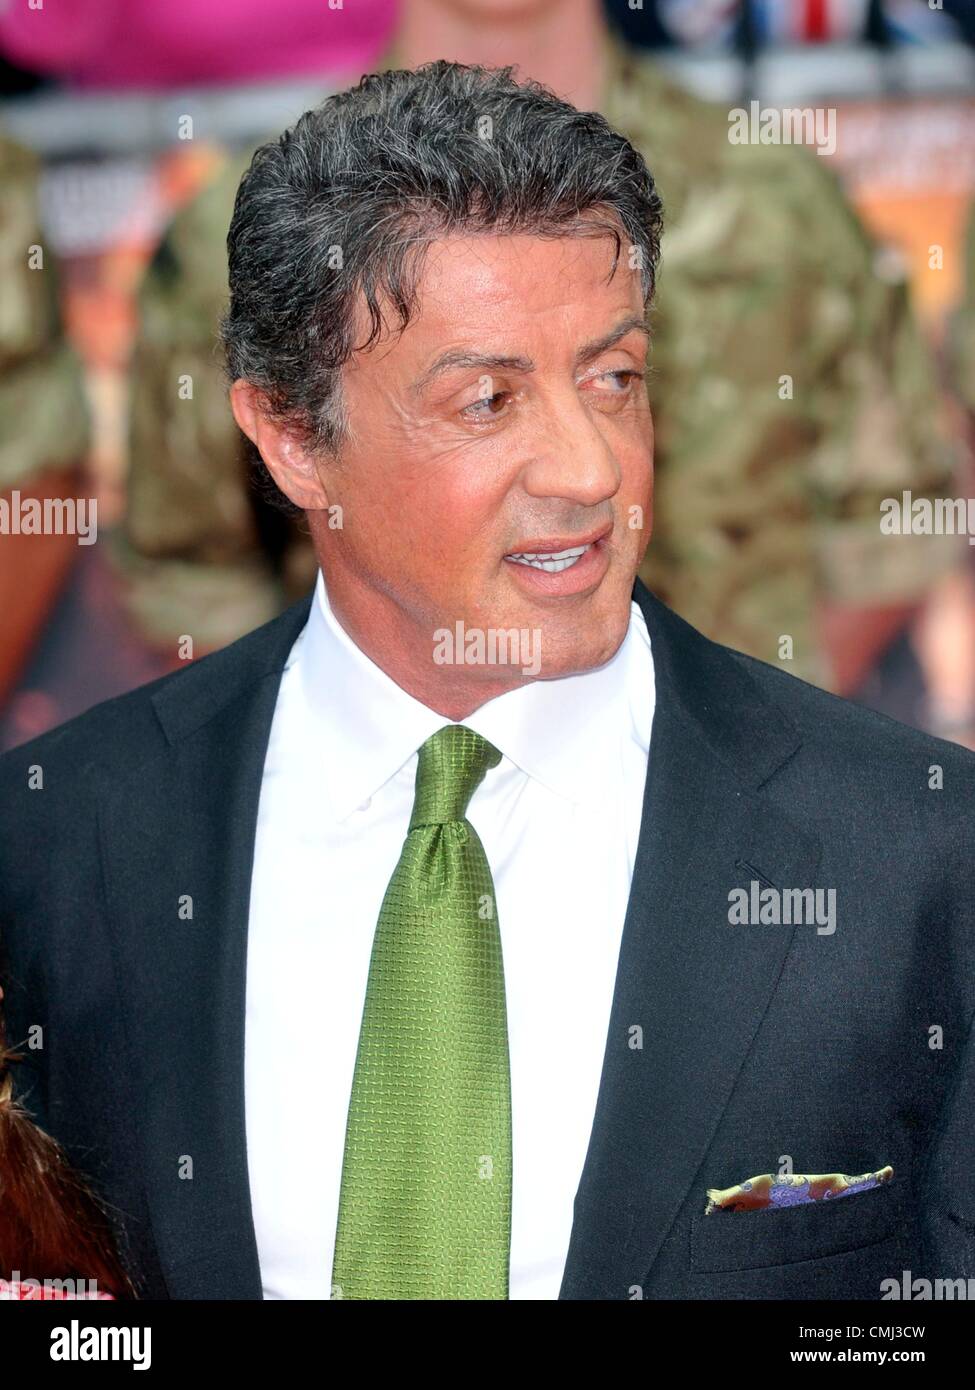 13th Aug 2012. Sylvester Stallone at 'The Expendables 2' UK Premiere held at the Empire Leicester Square London, England - 13.08.12 Stock Photo